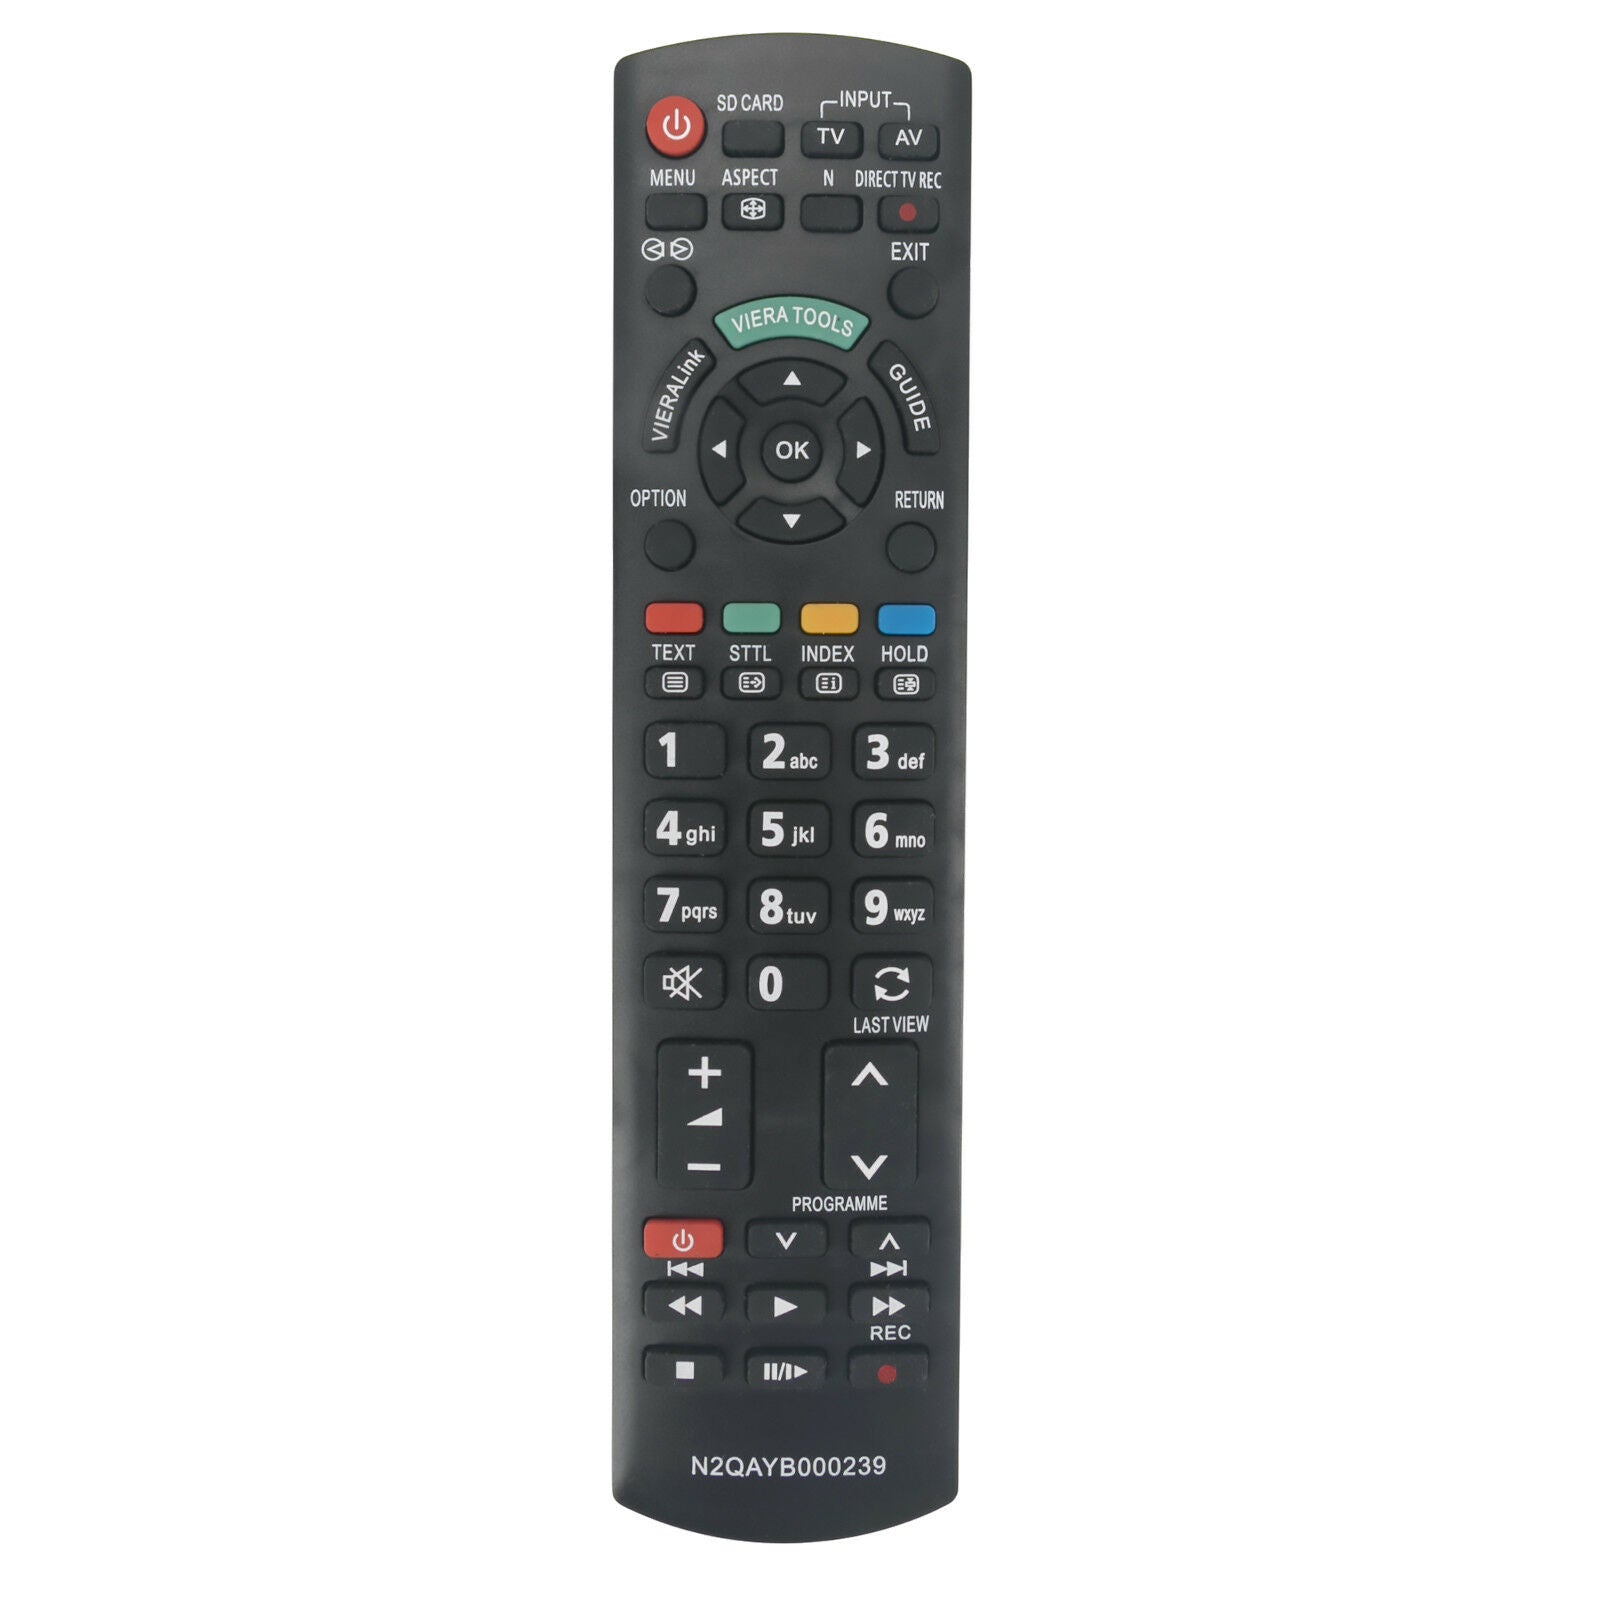 N2QAYB000239 Replacement Remote Control for Panasonic TH-37PX80BA TH-37PX80EA TH-42PX80BA